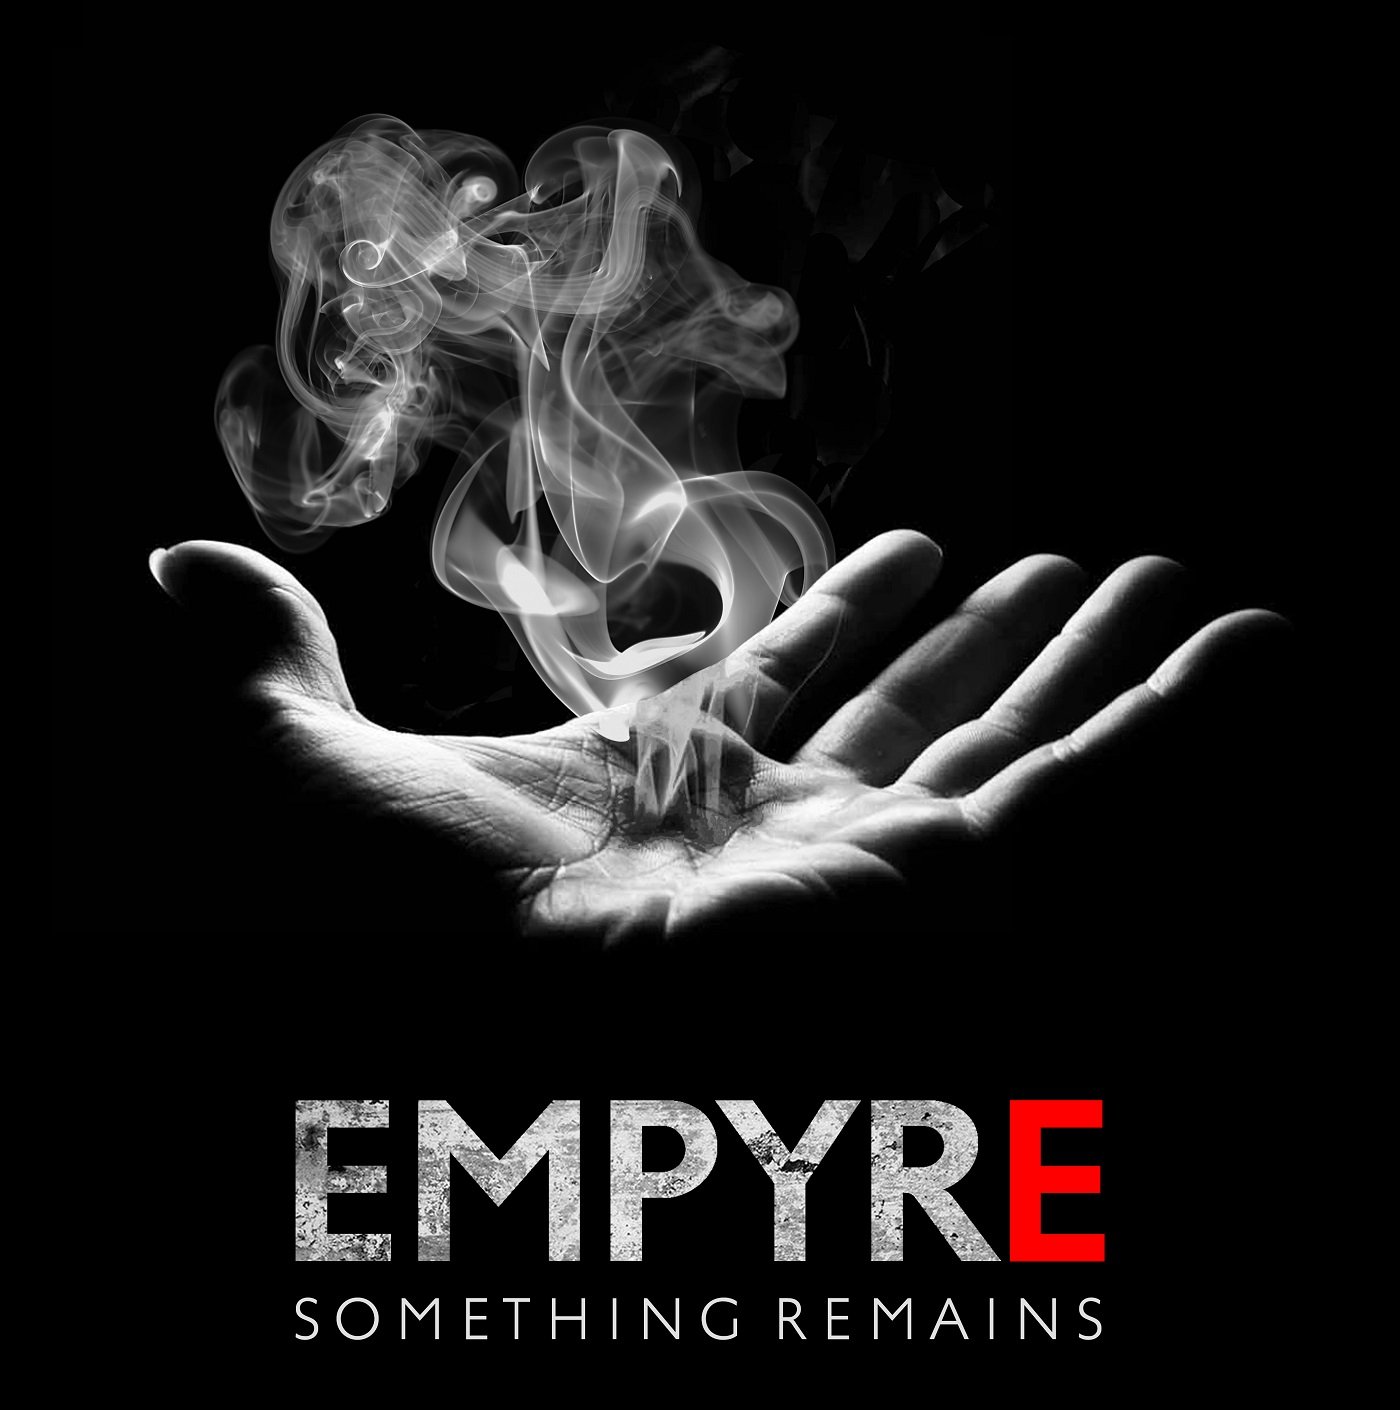 O something. Empyre Ultra Loose. Empyre Jeans logo. Remains of something. The remains.